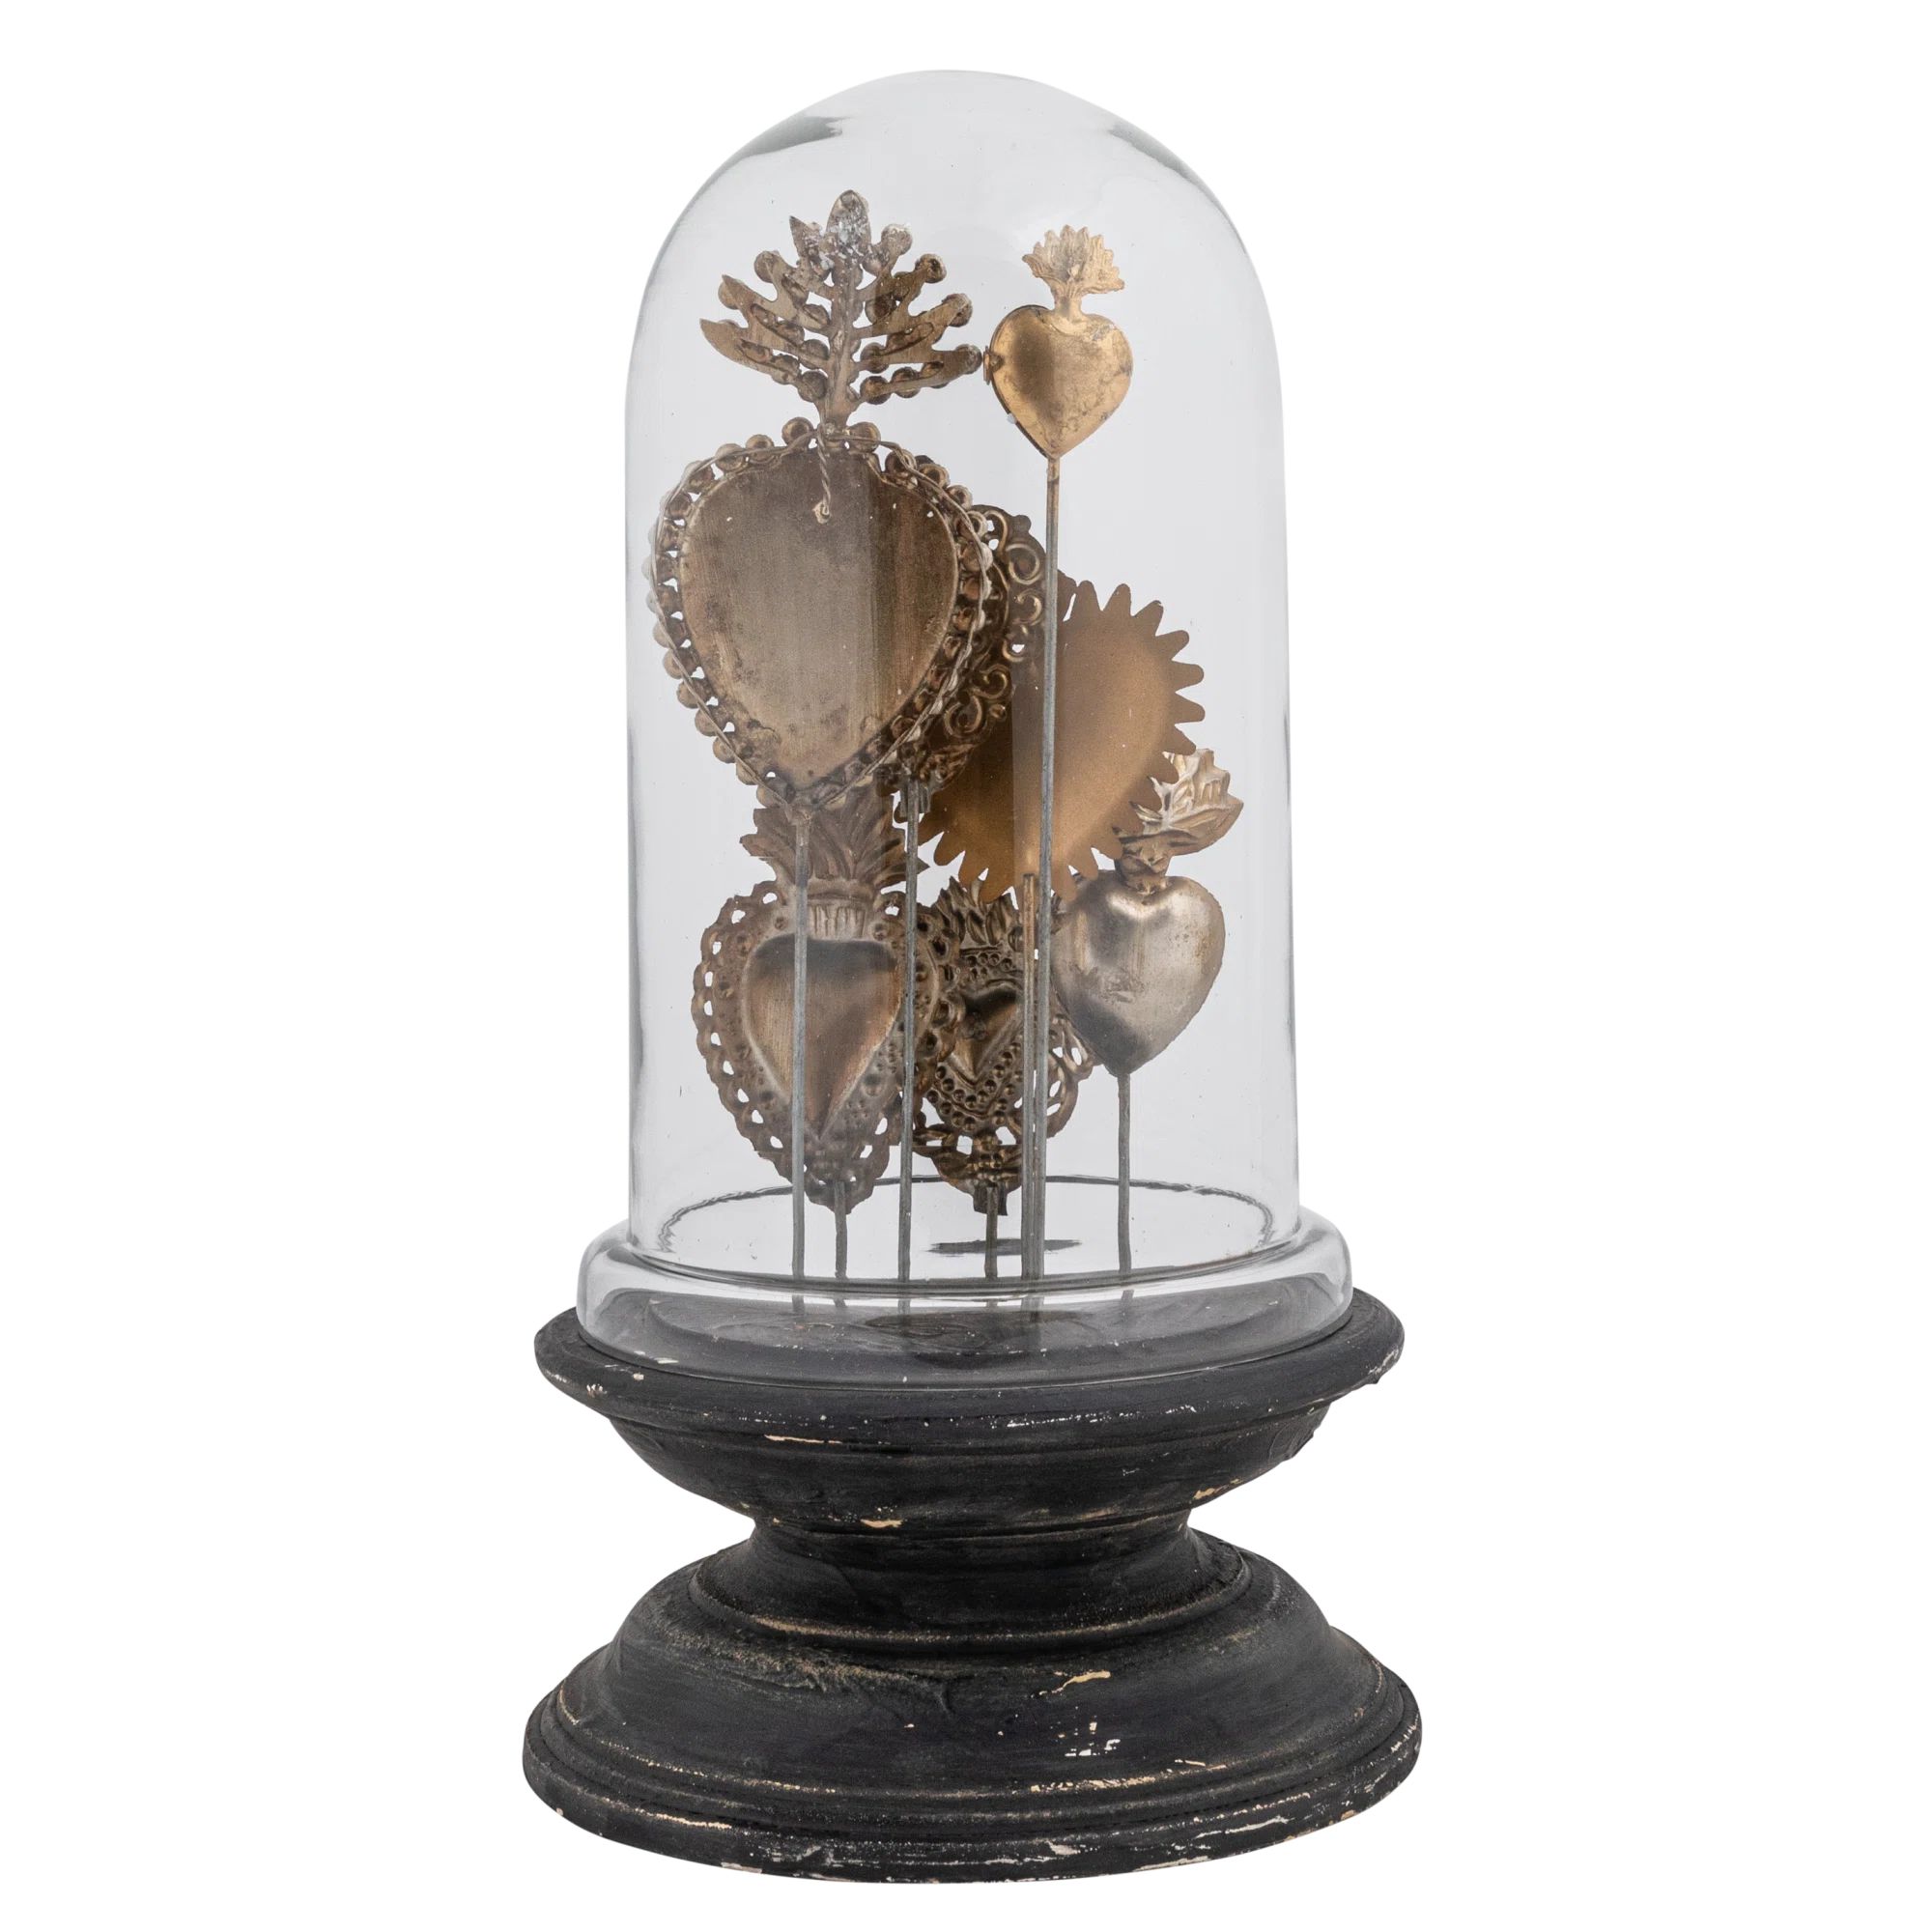 Williston Forge Text & Numbers Cloche Or Water Globe & Reviews | Wayfair | Wayfair North America